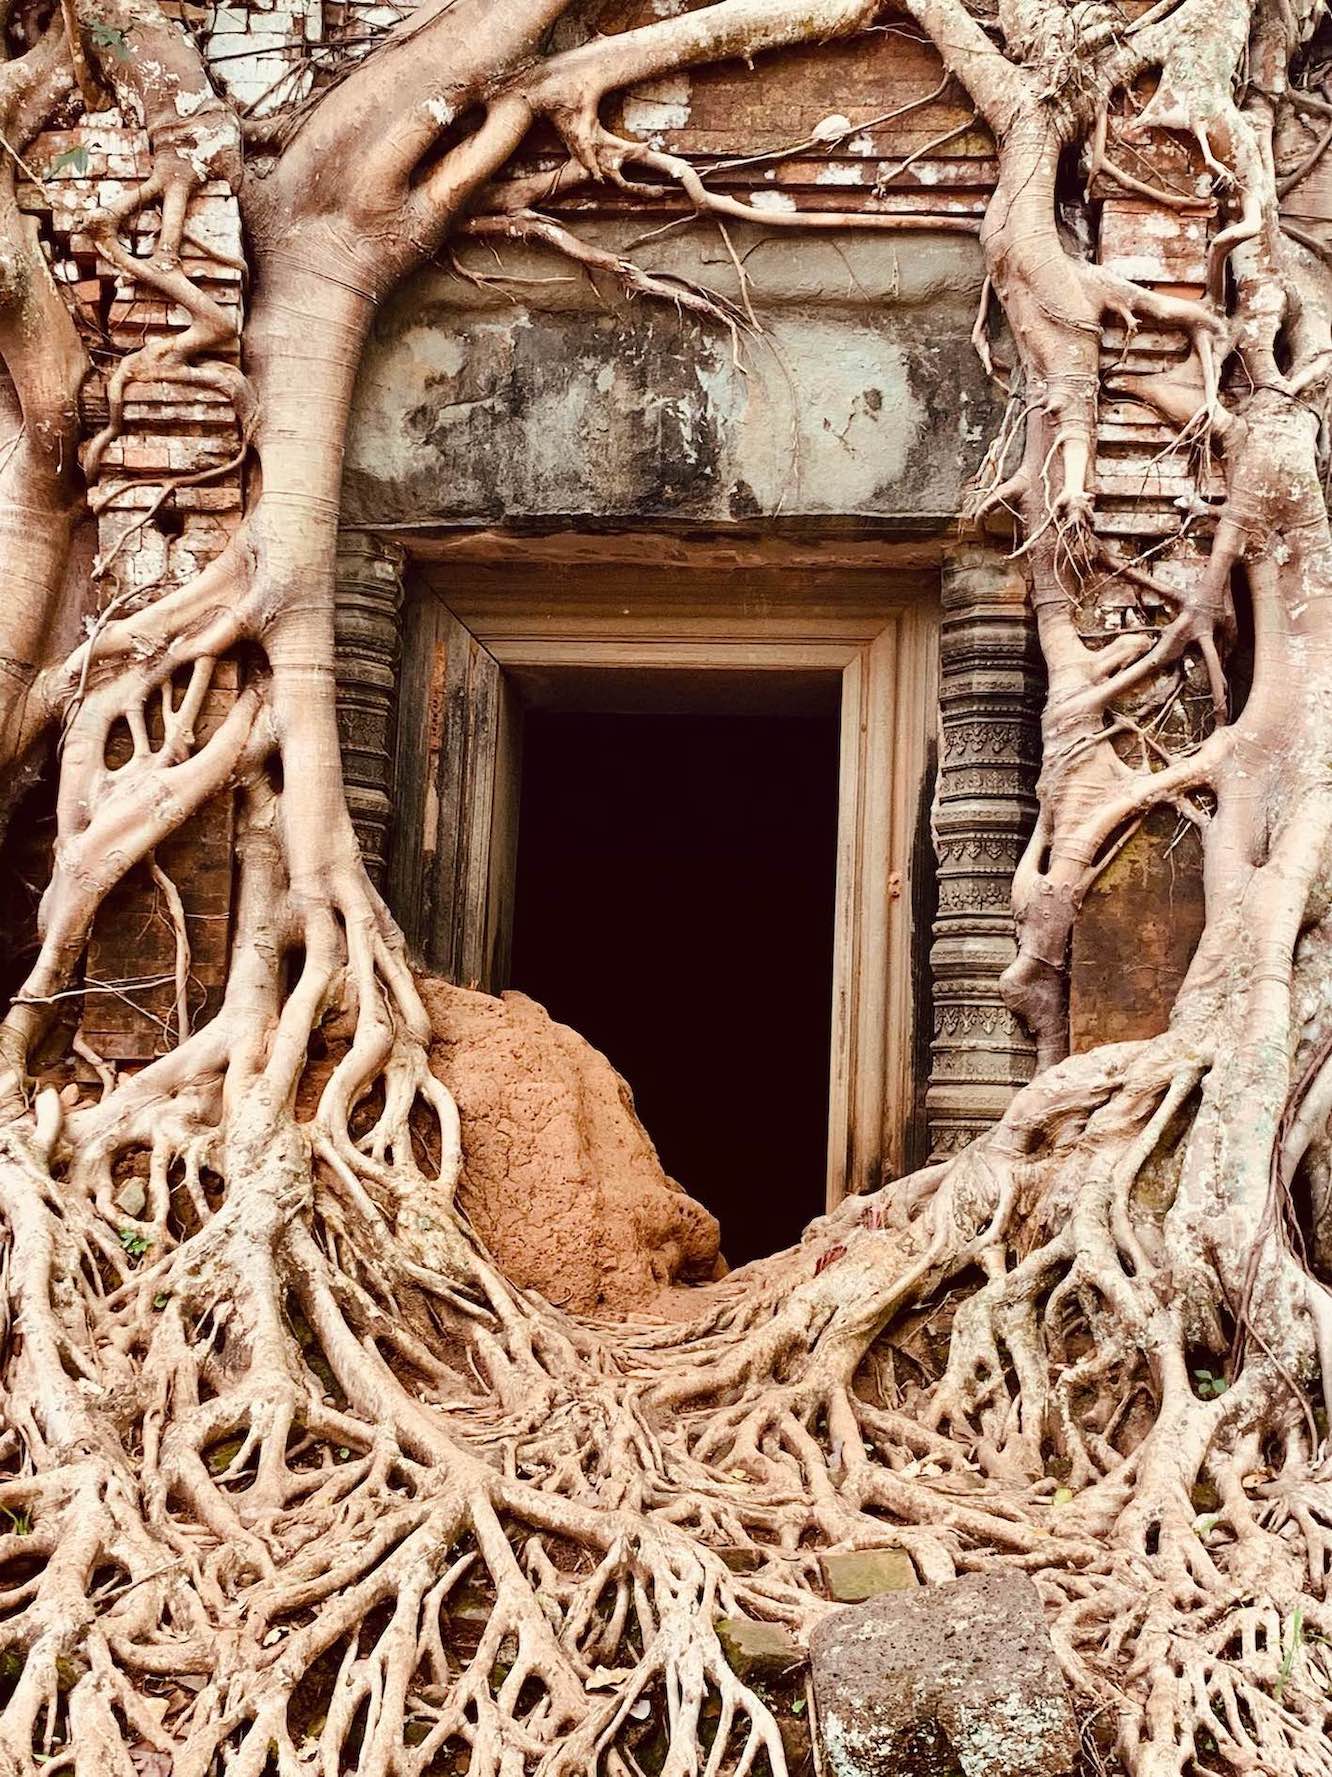 The twisted tree temples of Koh Ker